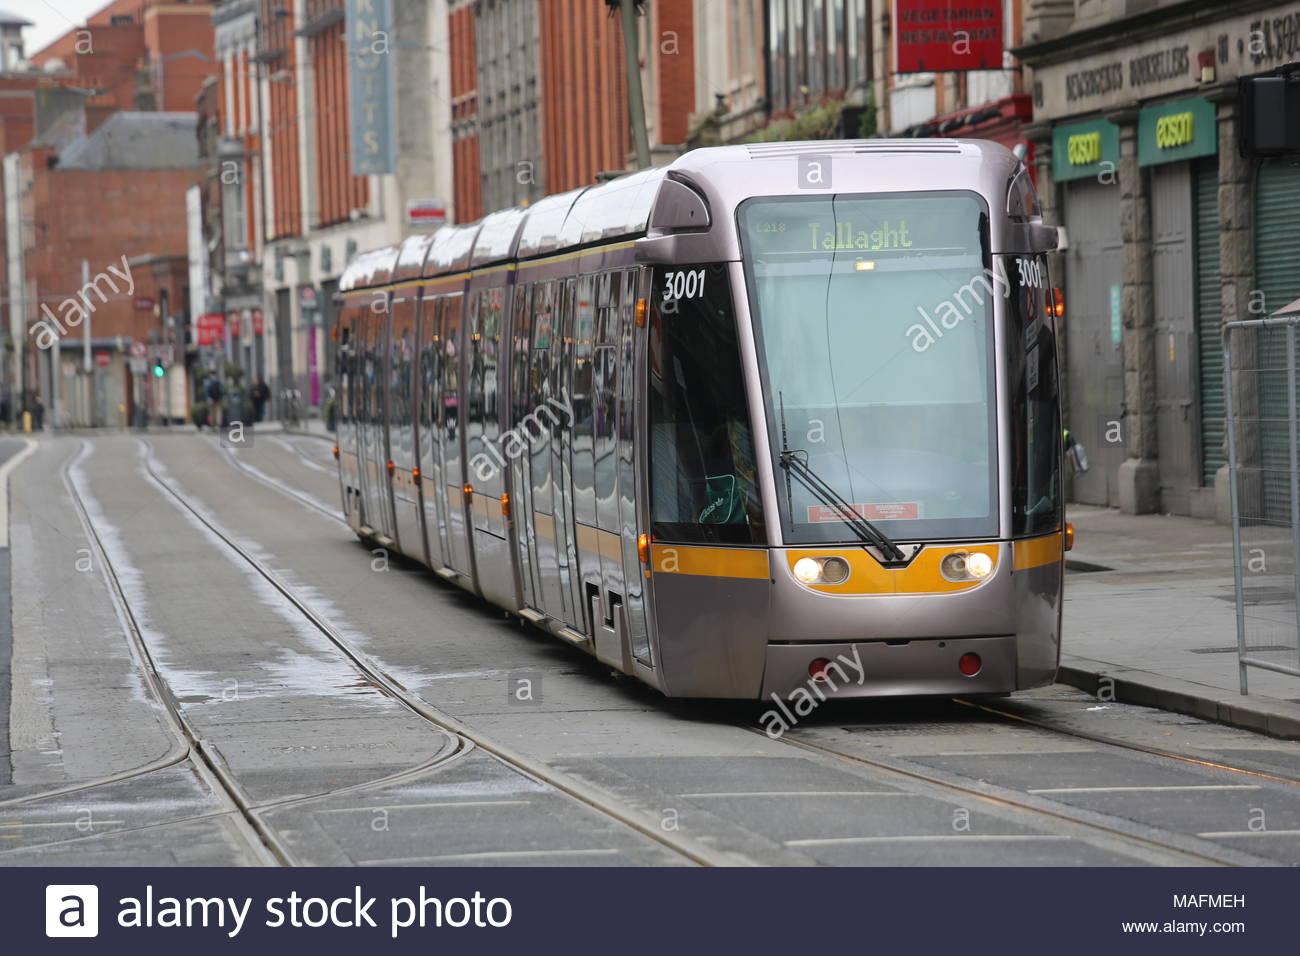 A Luas tram in inner Dublin, Ireland at a time when the Luas system has been rapidly developed and is being used by many commuters in the capital city Stock Photo